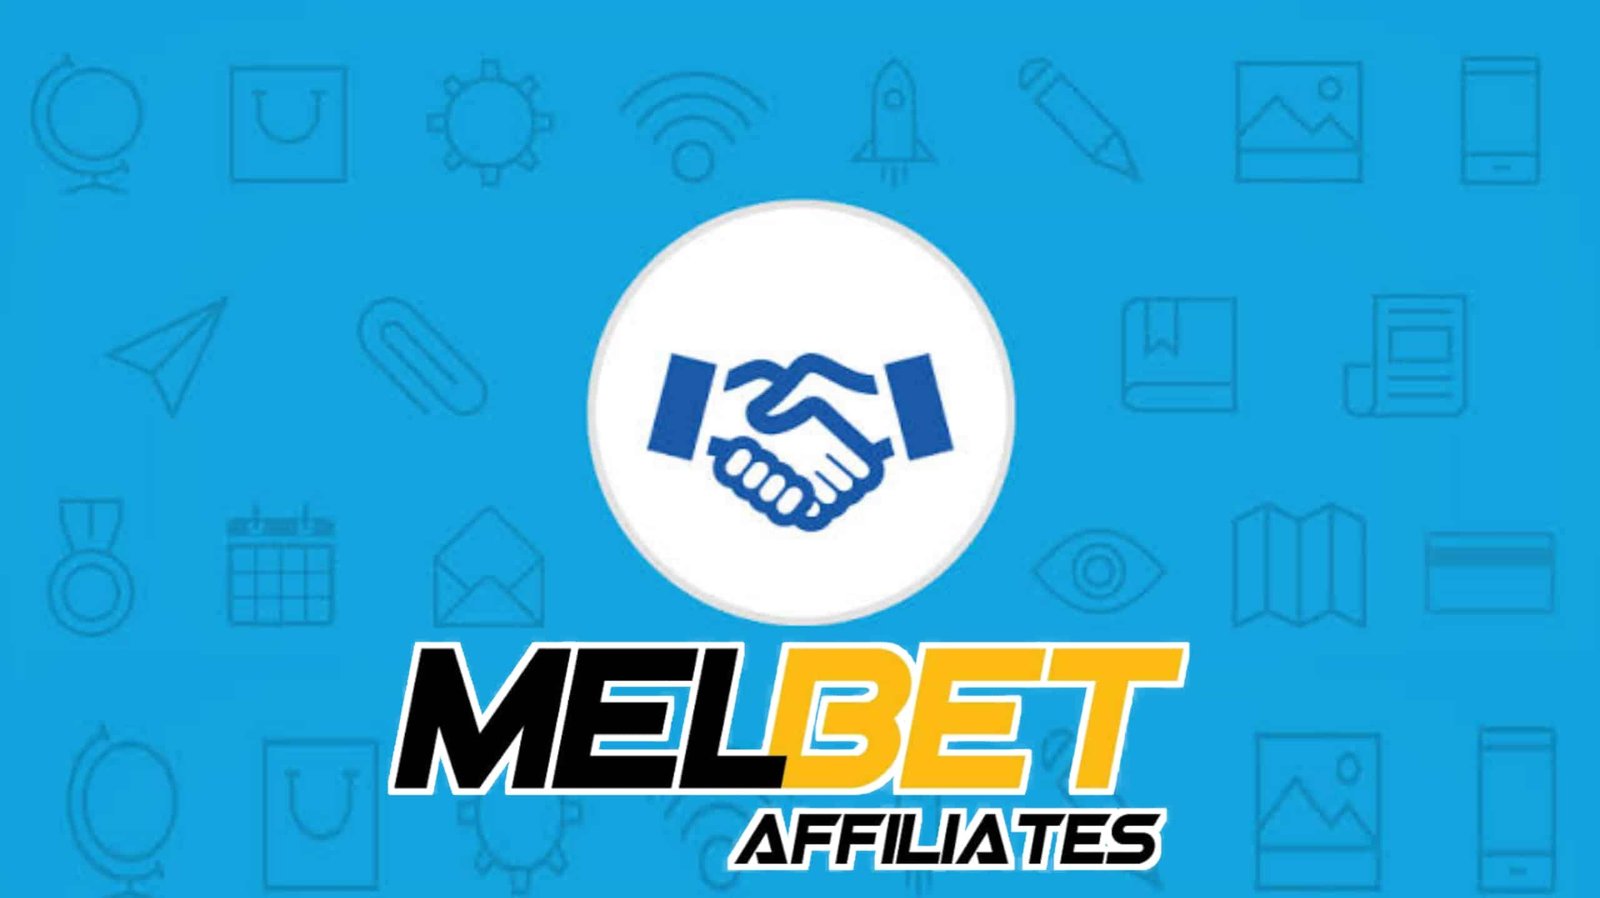 How to Create a Melbet Affiliate Account